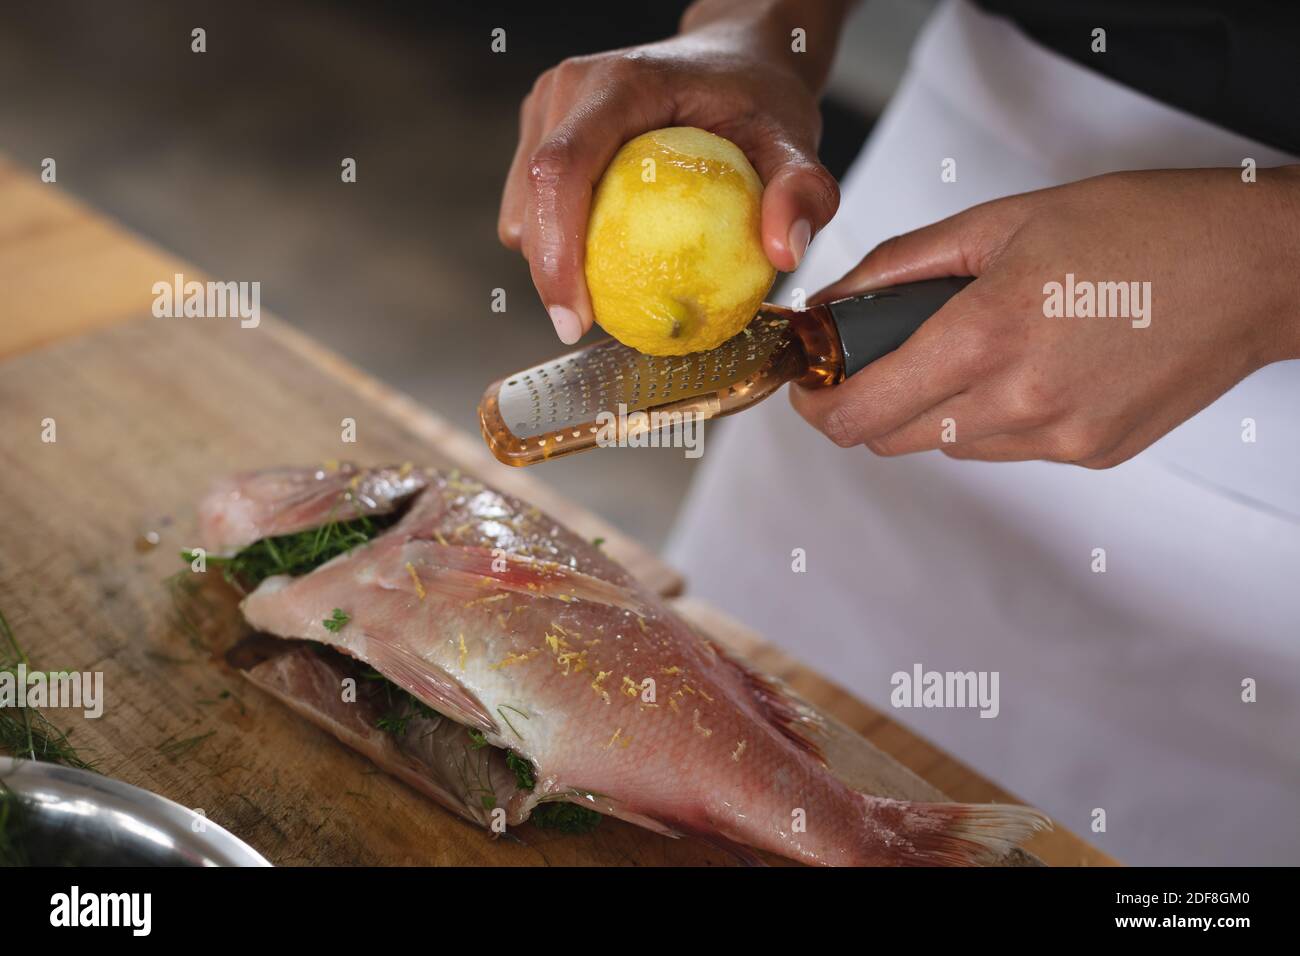 Mid section of chef grating lemon rind on roasted fish in restaurant kitchen Stock Photo